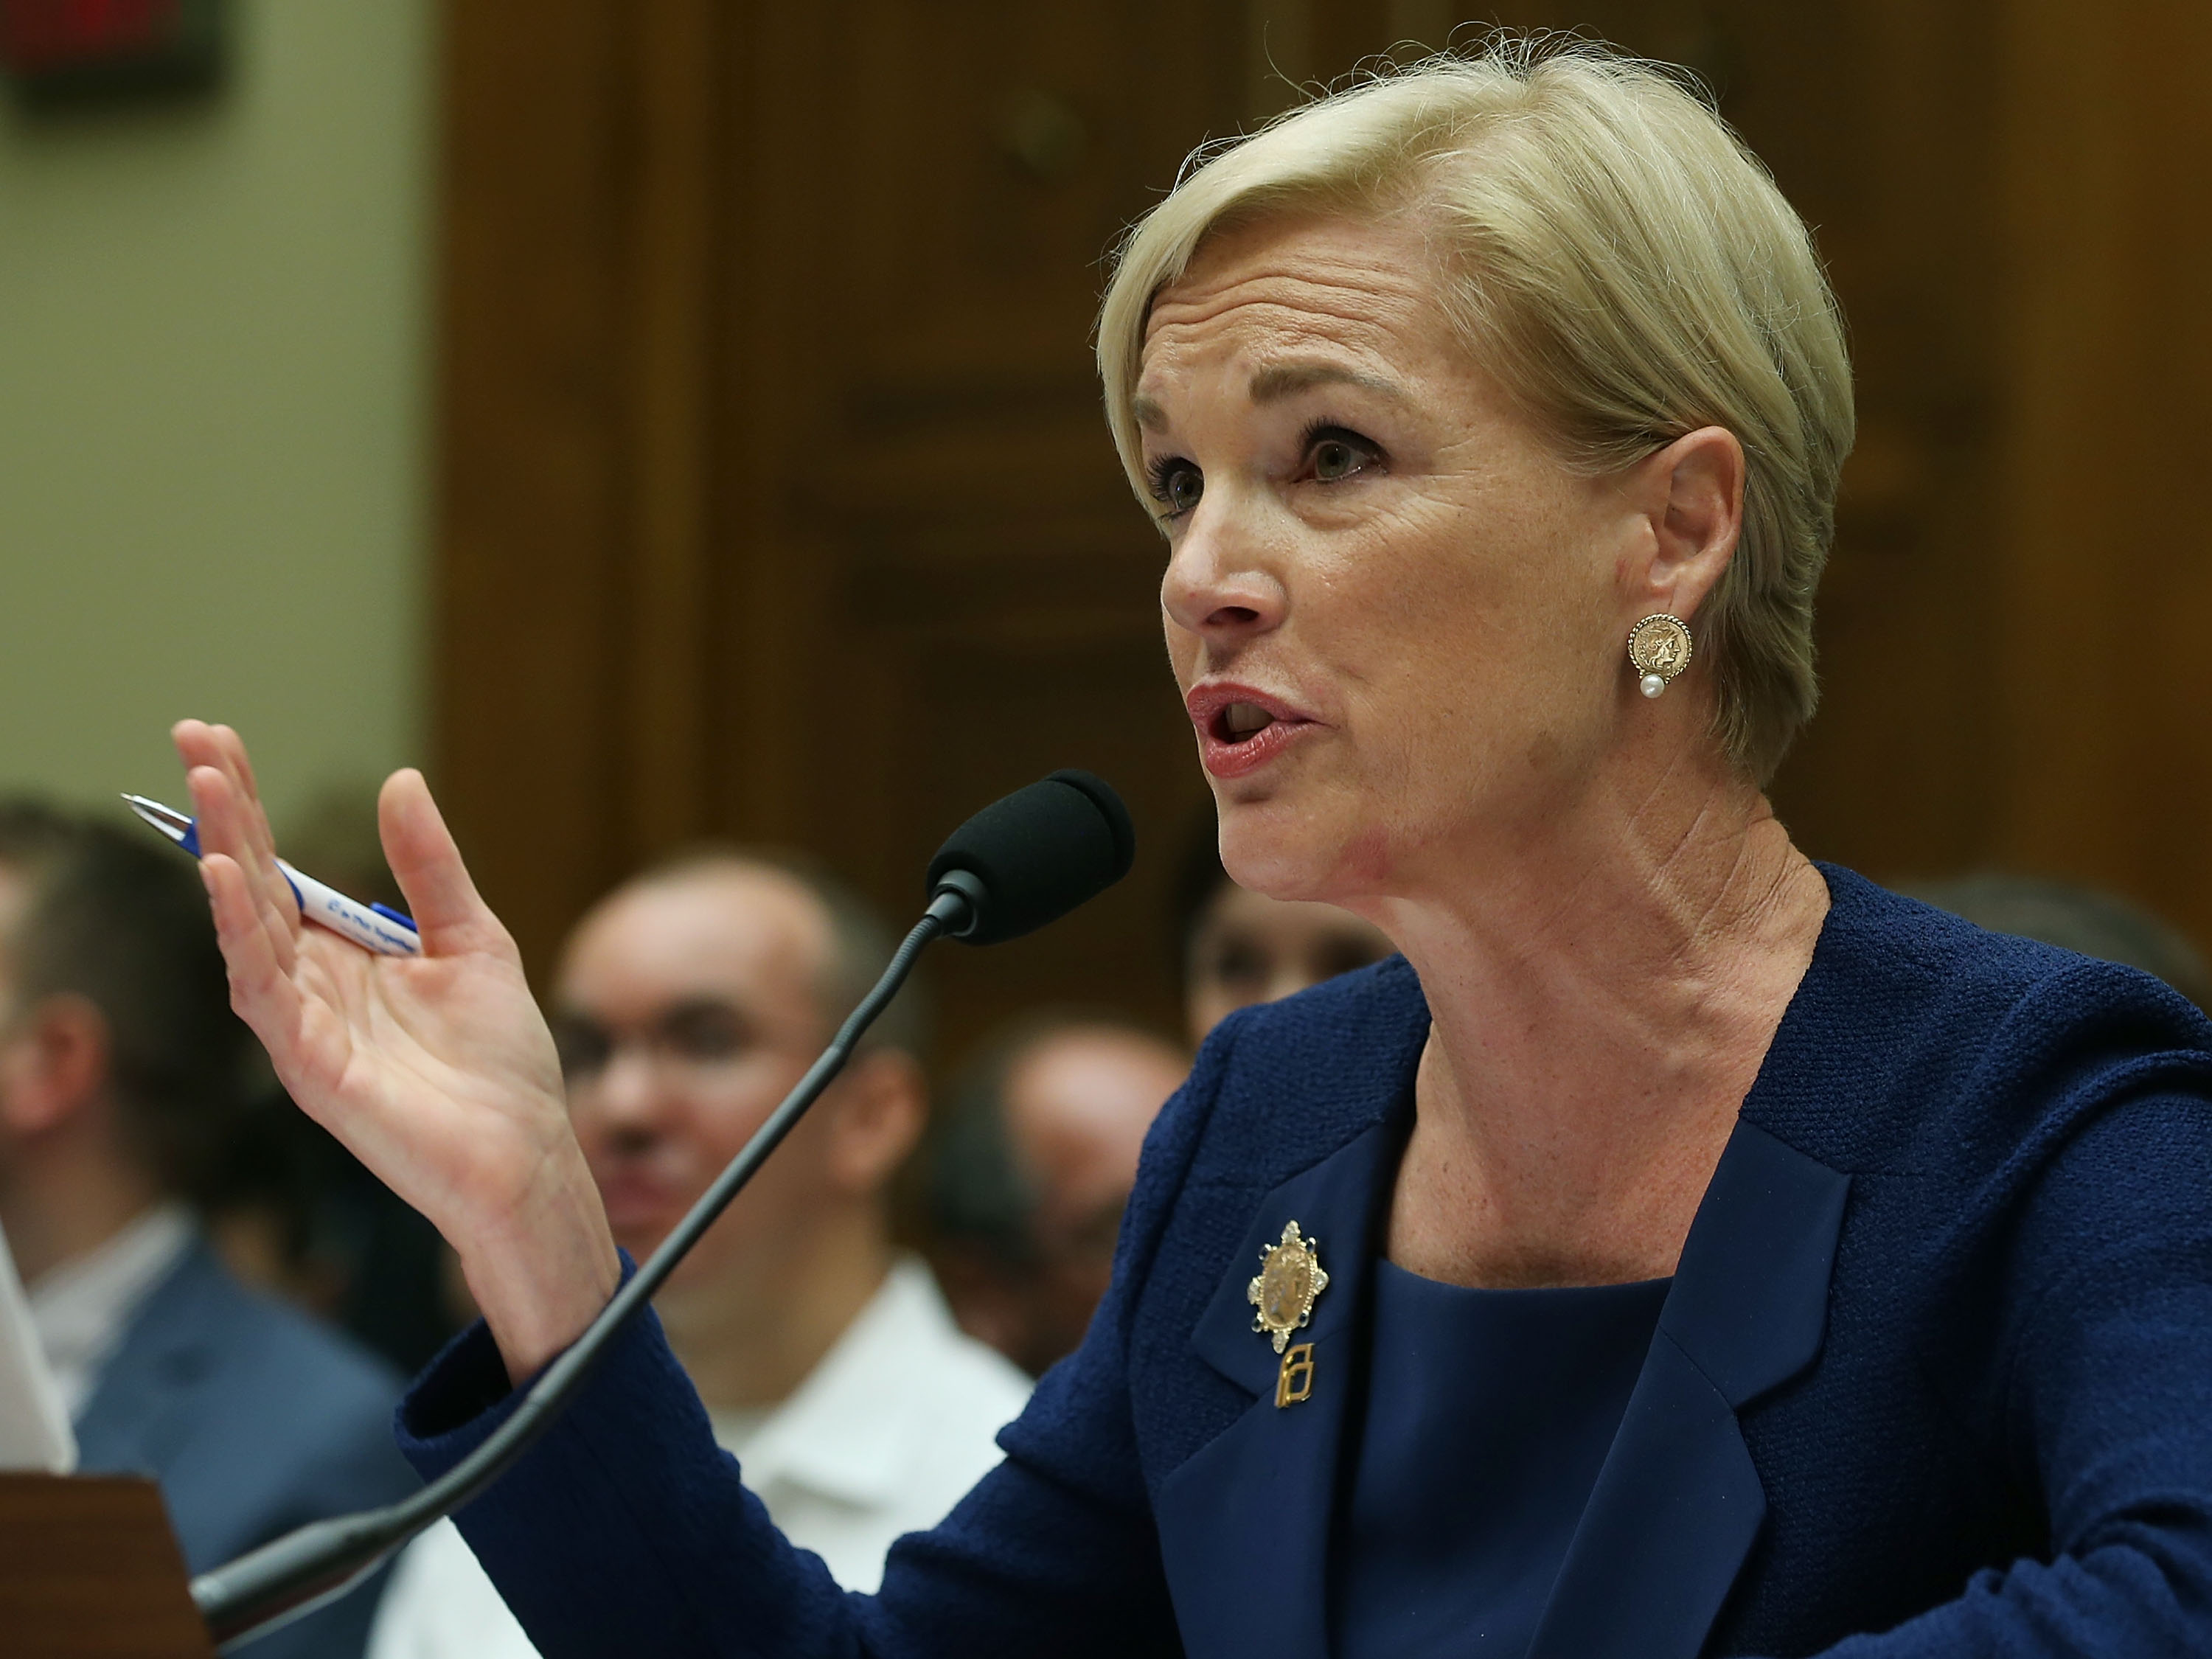 President Of Planned Parenthood Cecile Richards Testifies To Committee On Use Of Taxpayer Funding